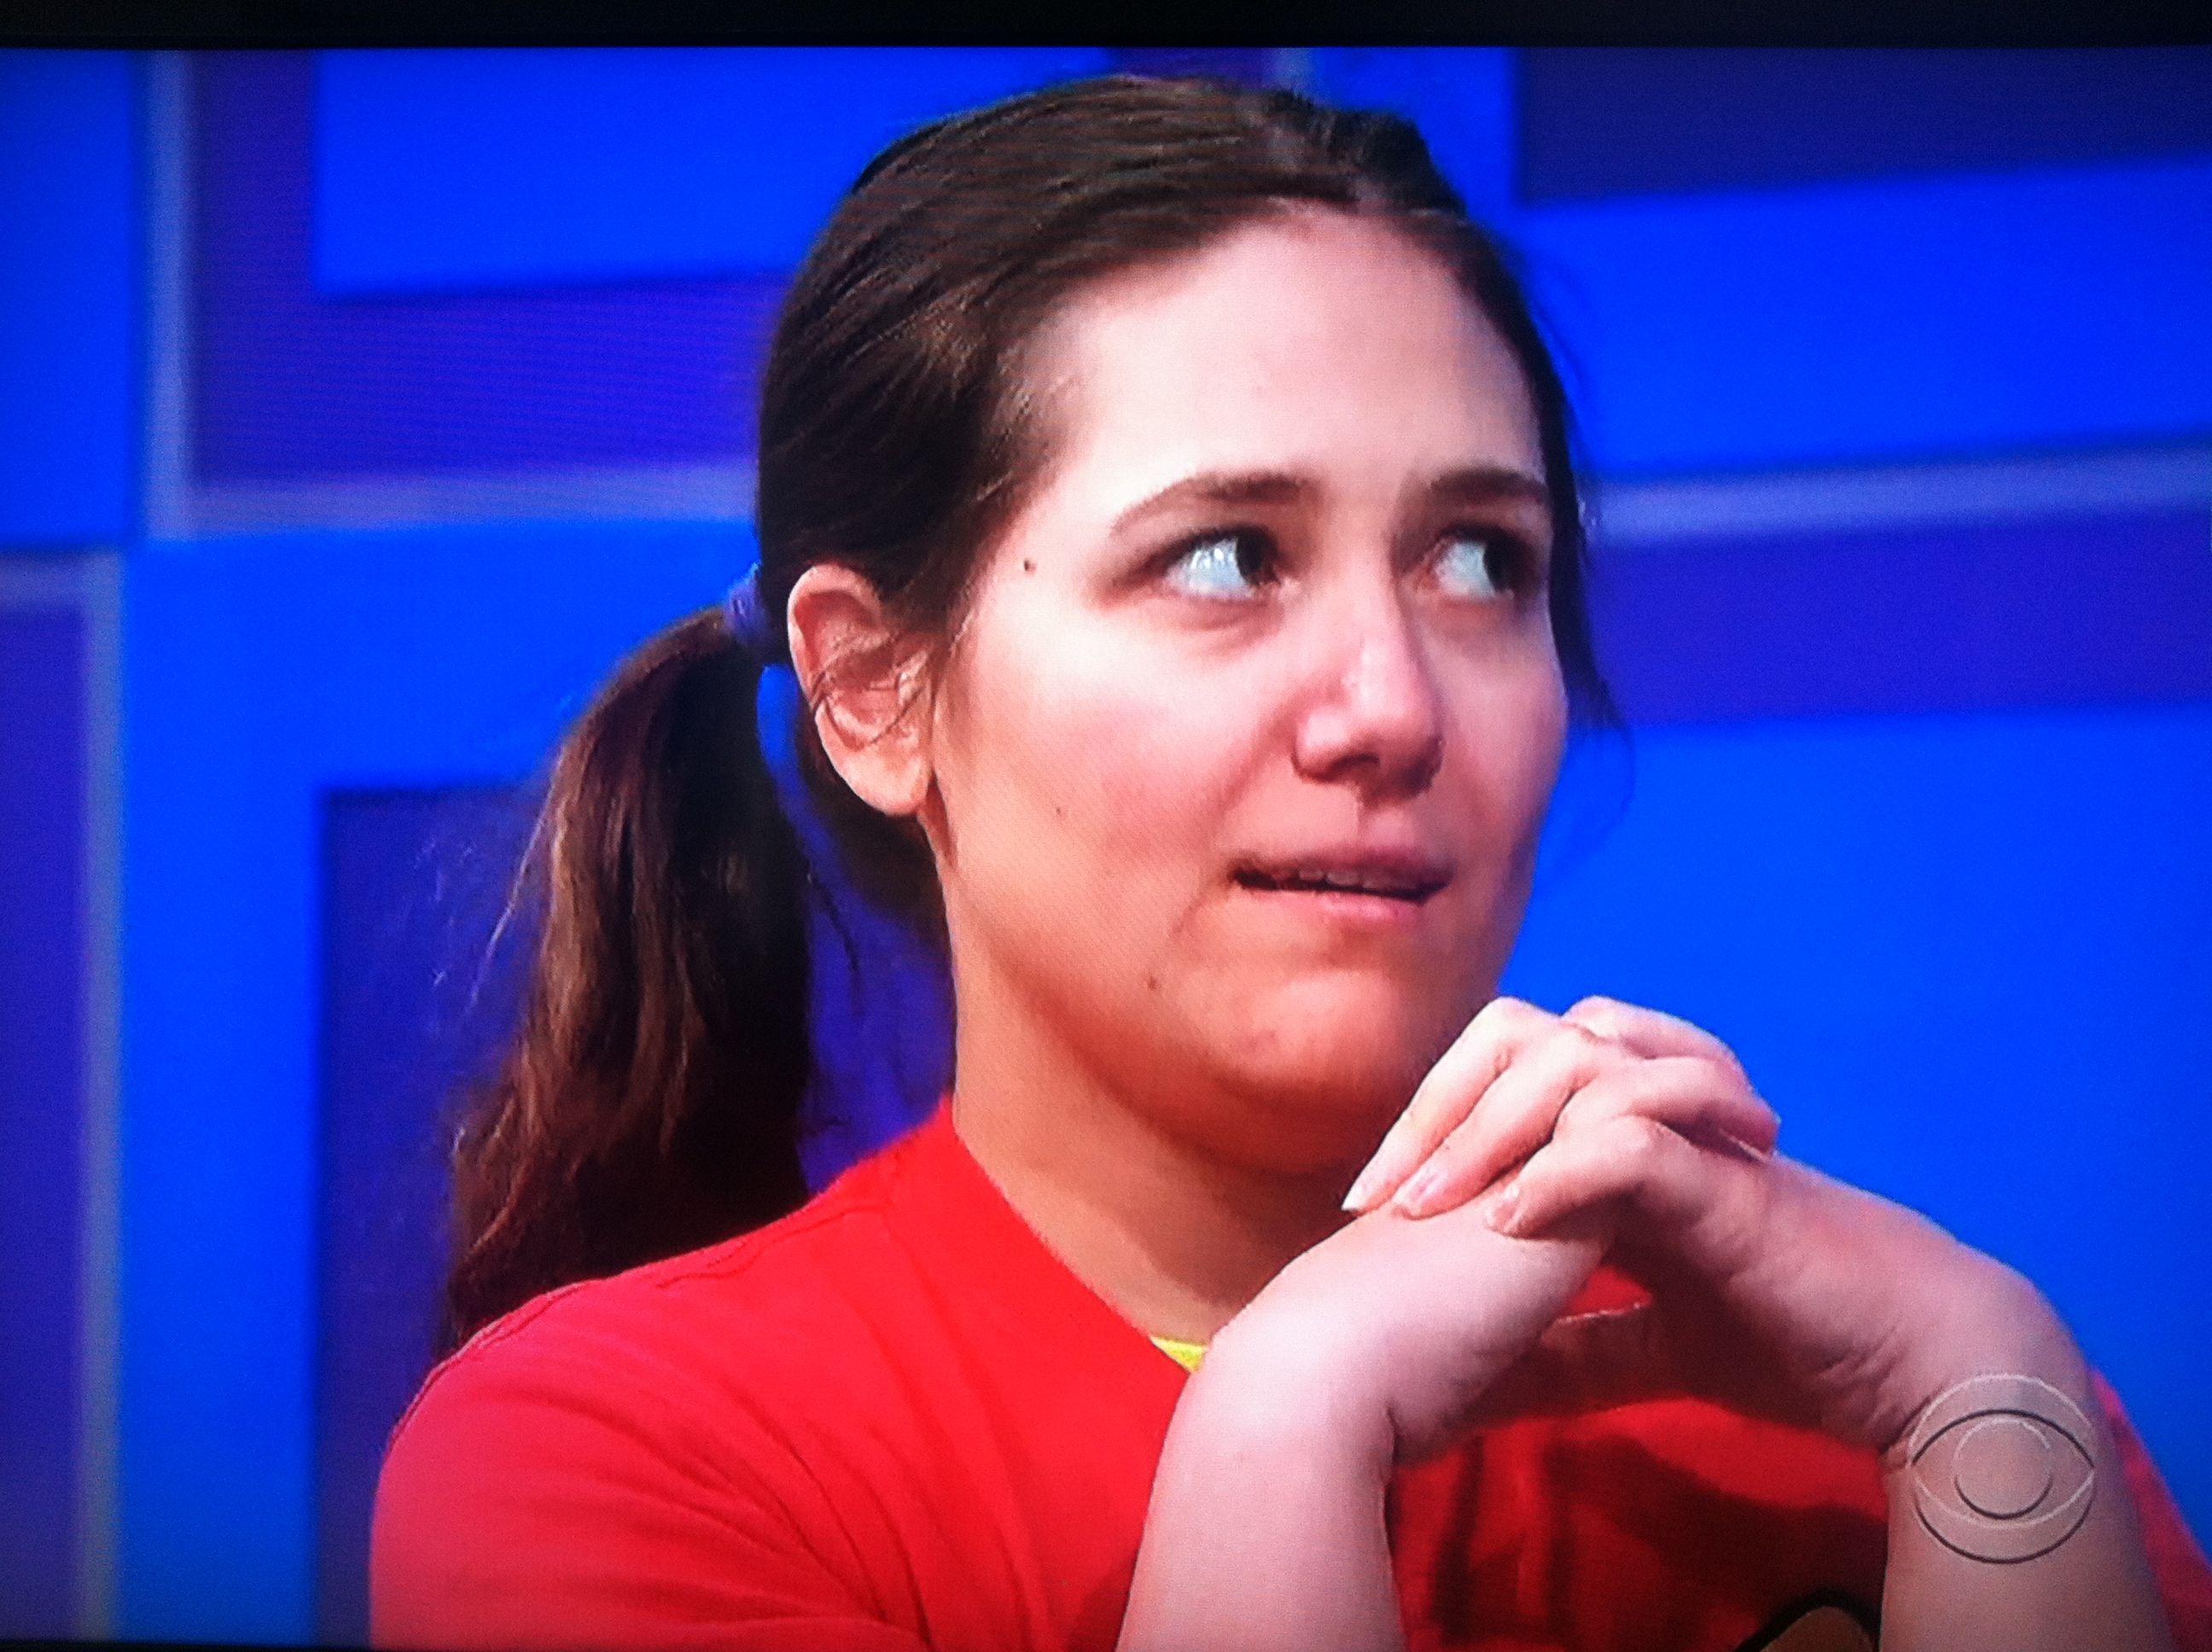 Aurora De Lucia looking nervous playing for a brand new car on The Price is Right